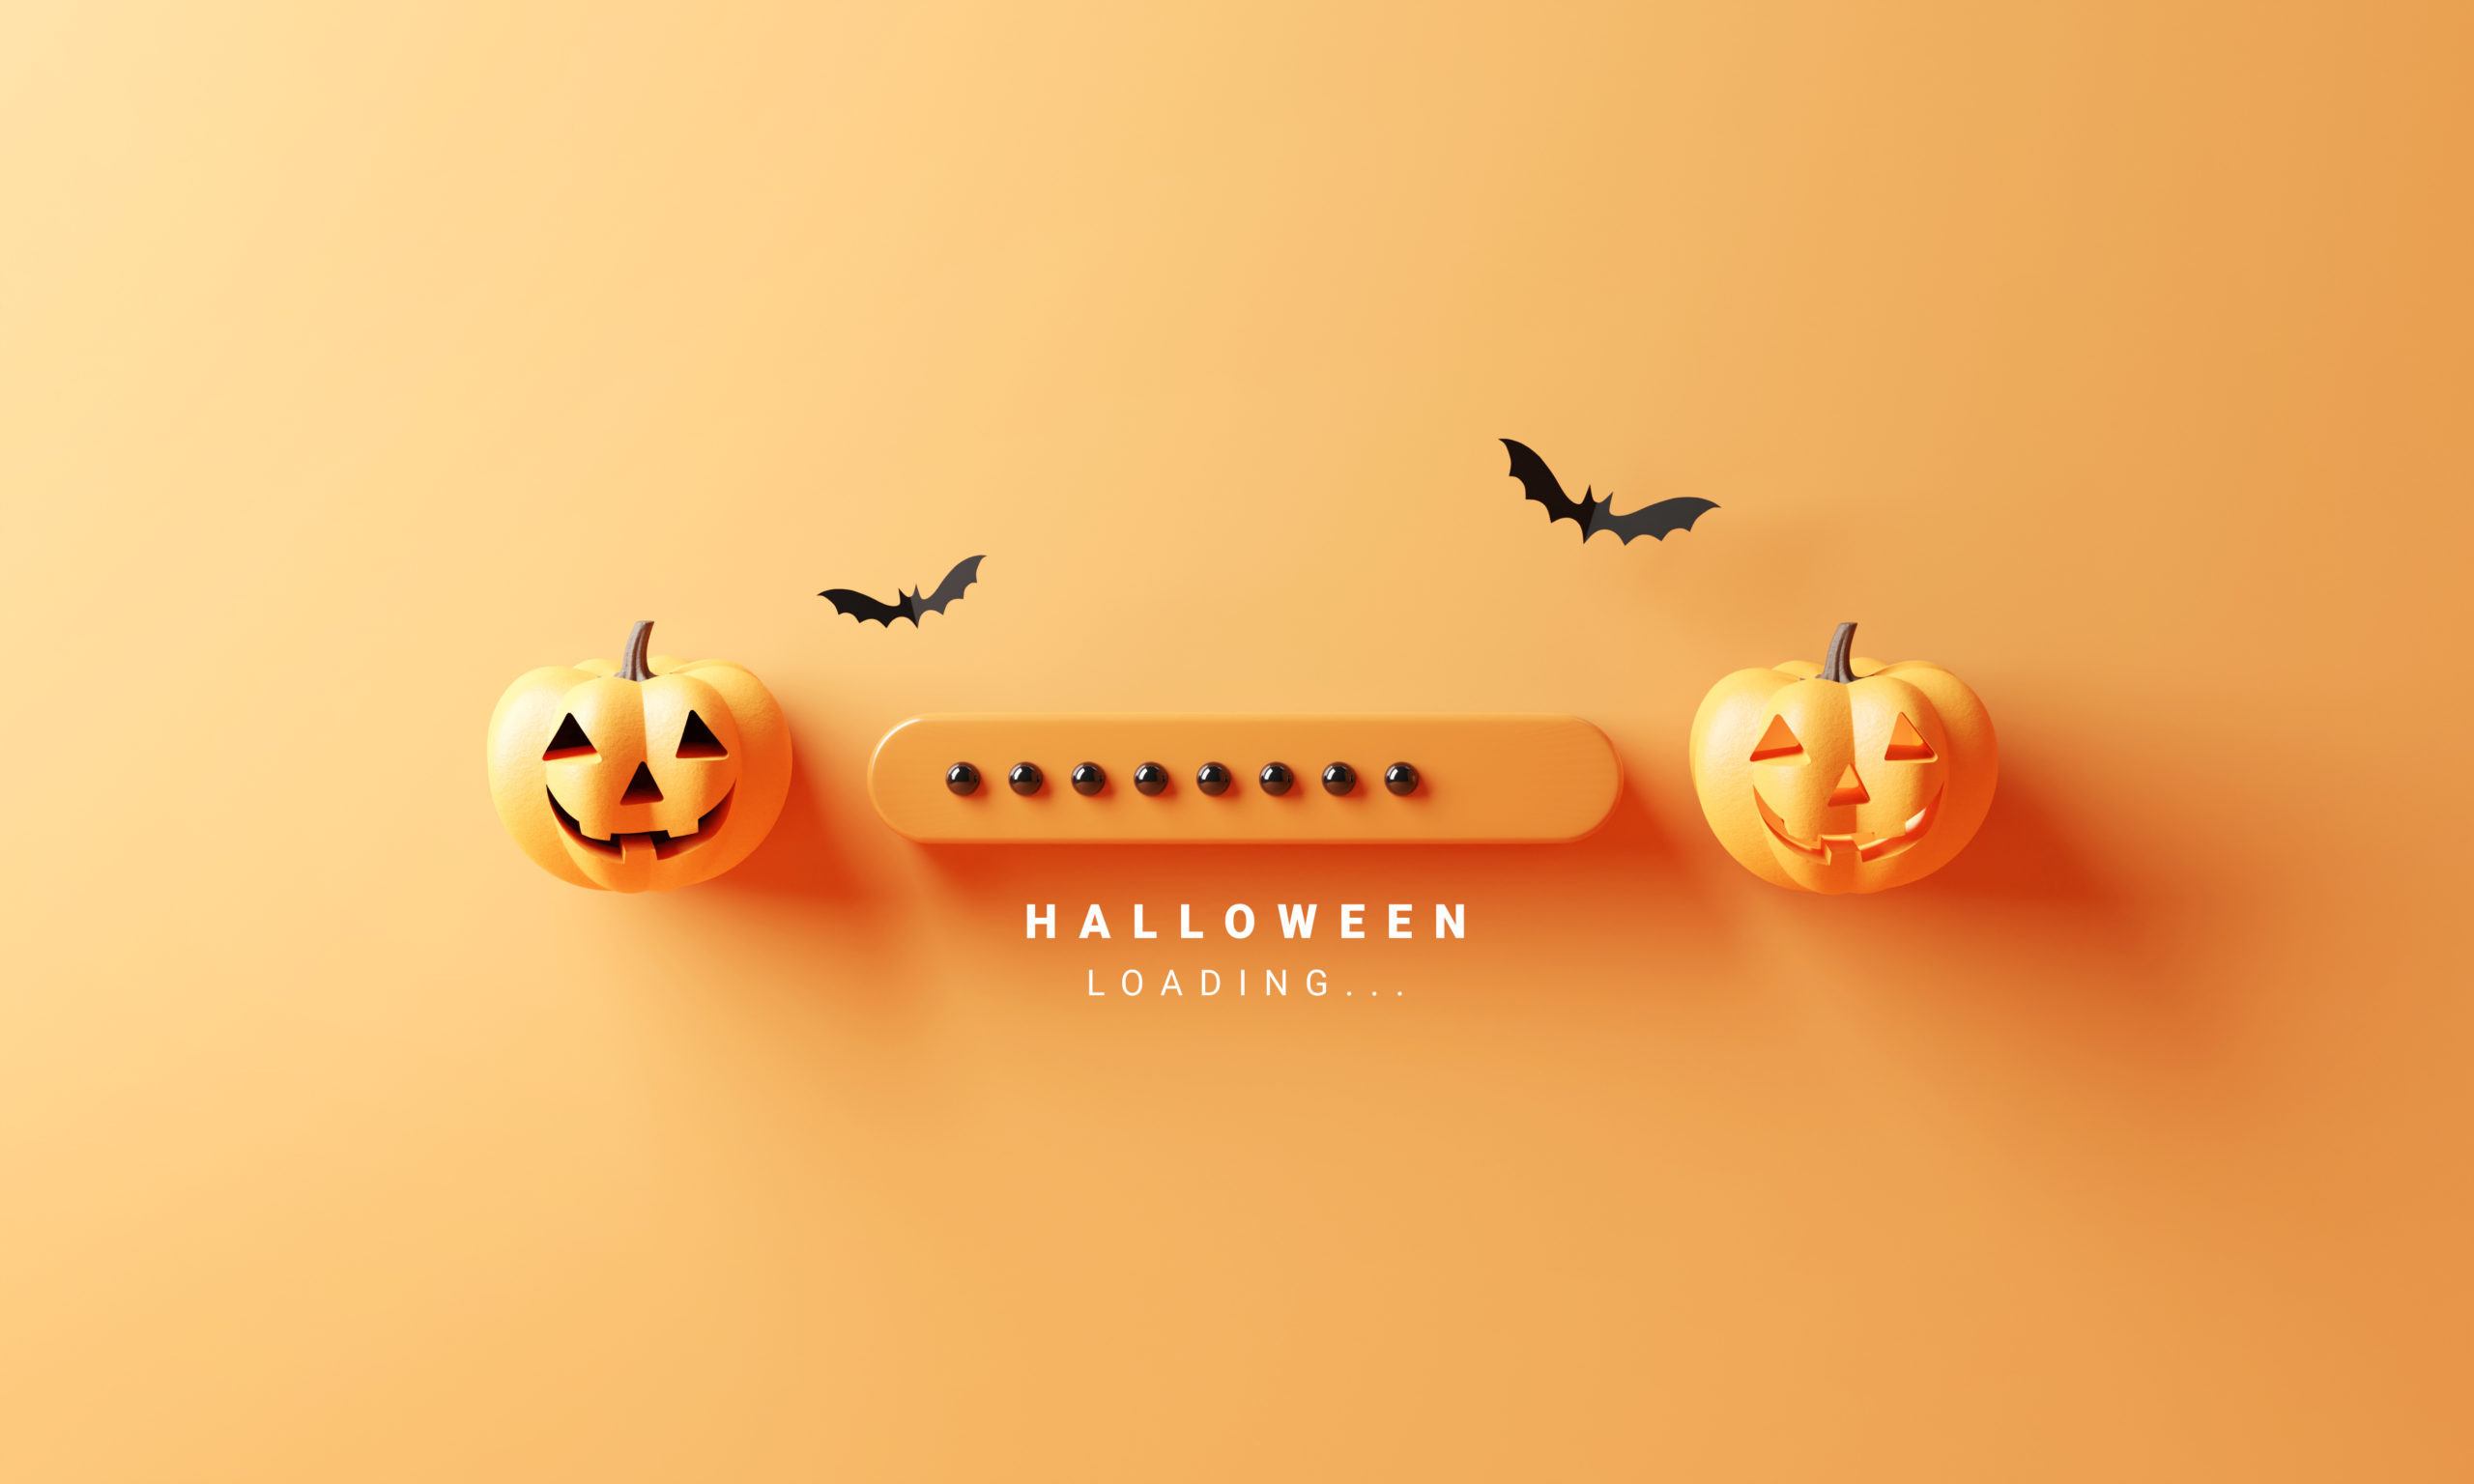 5 Smart Halloween Ideas for Businesses